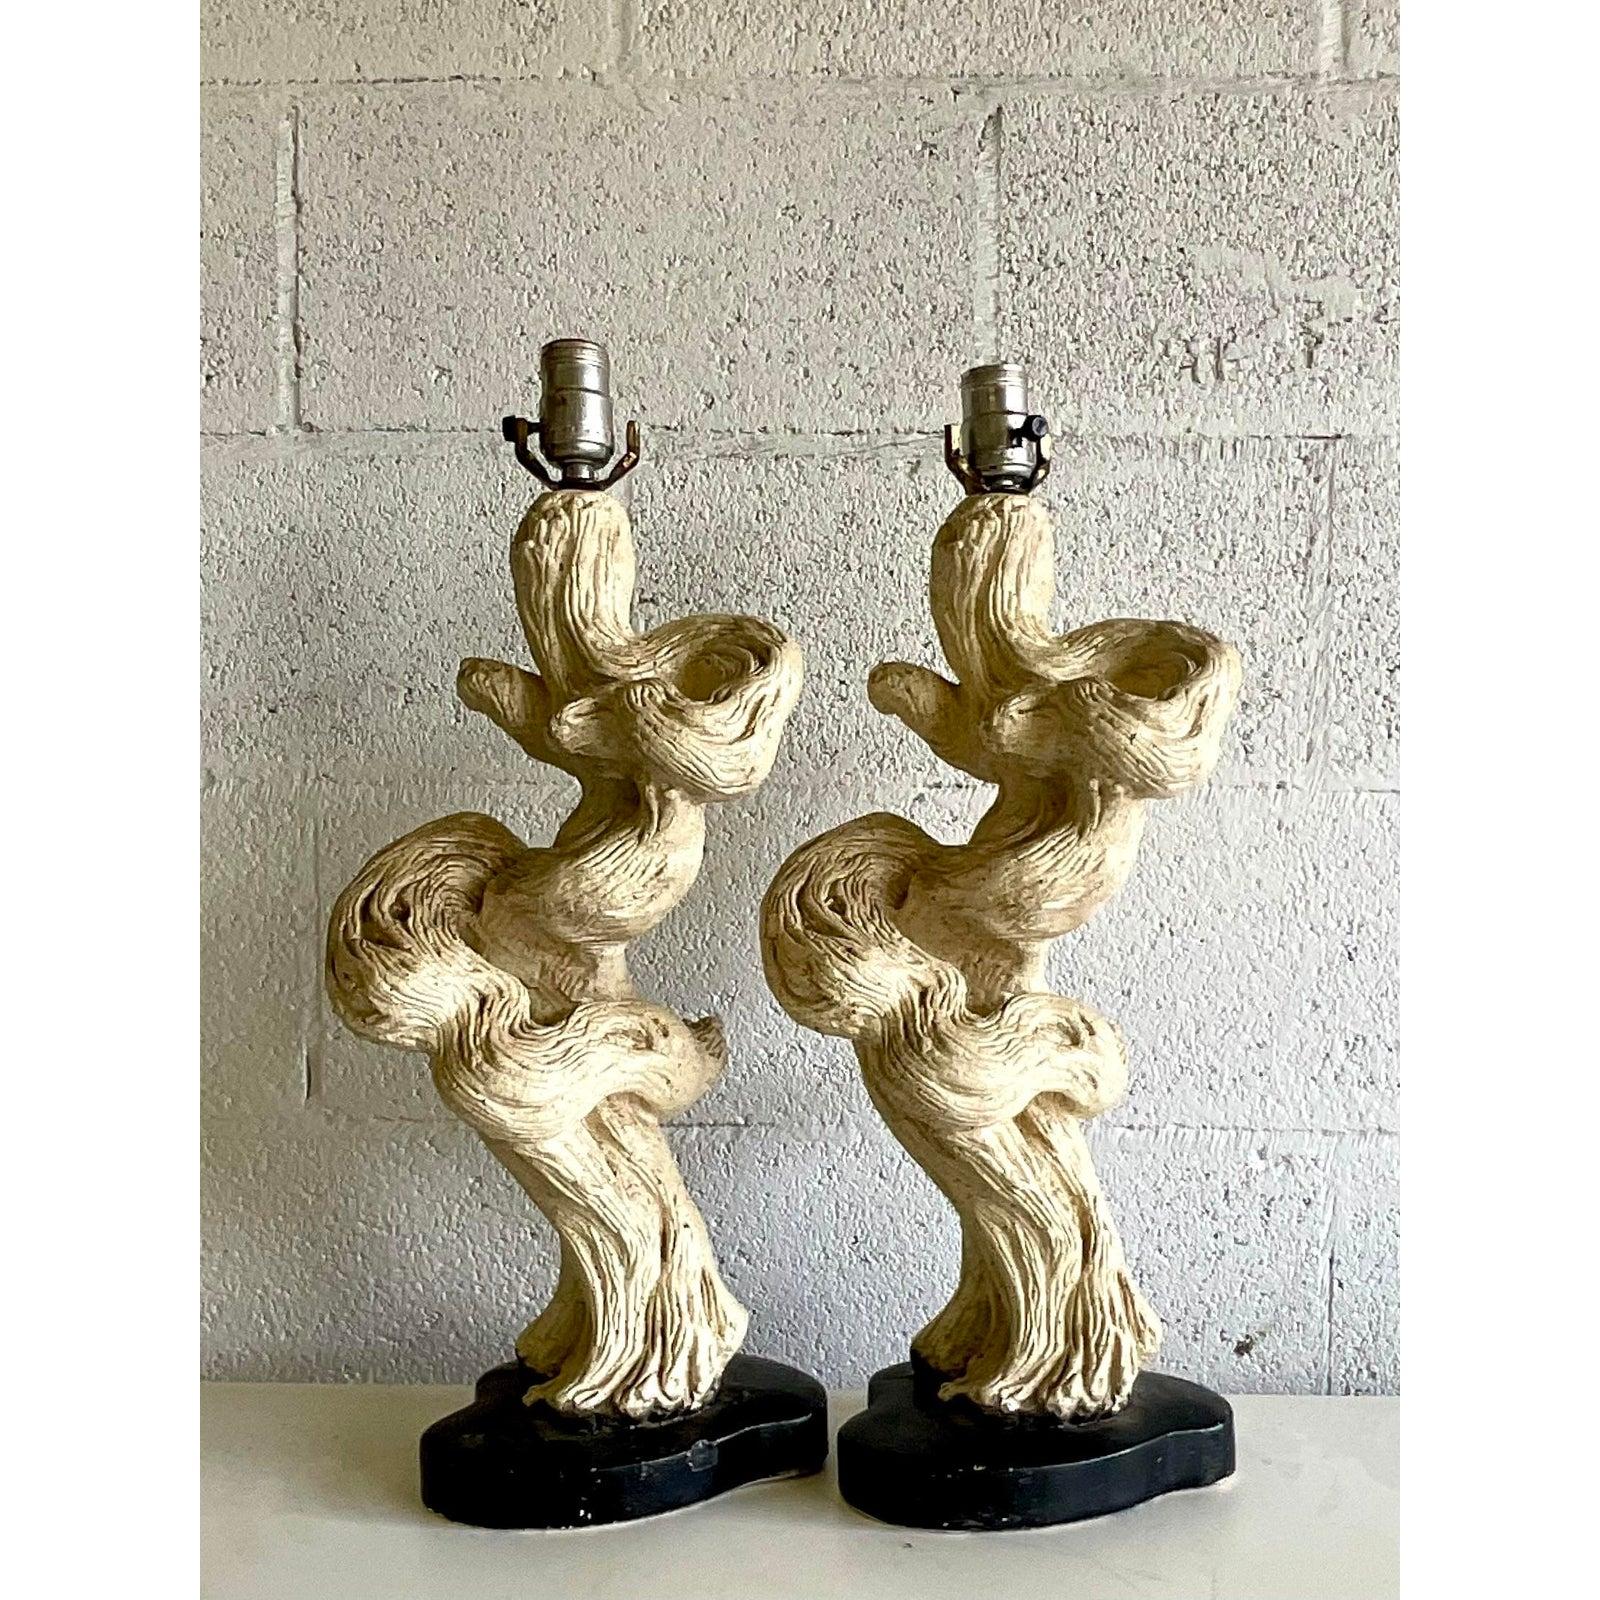 North American Vintage Mid-Century Modern Glazed Plaster Driftwood Lamps - a Pair For Sale